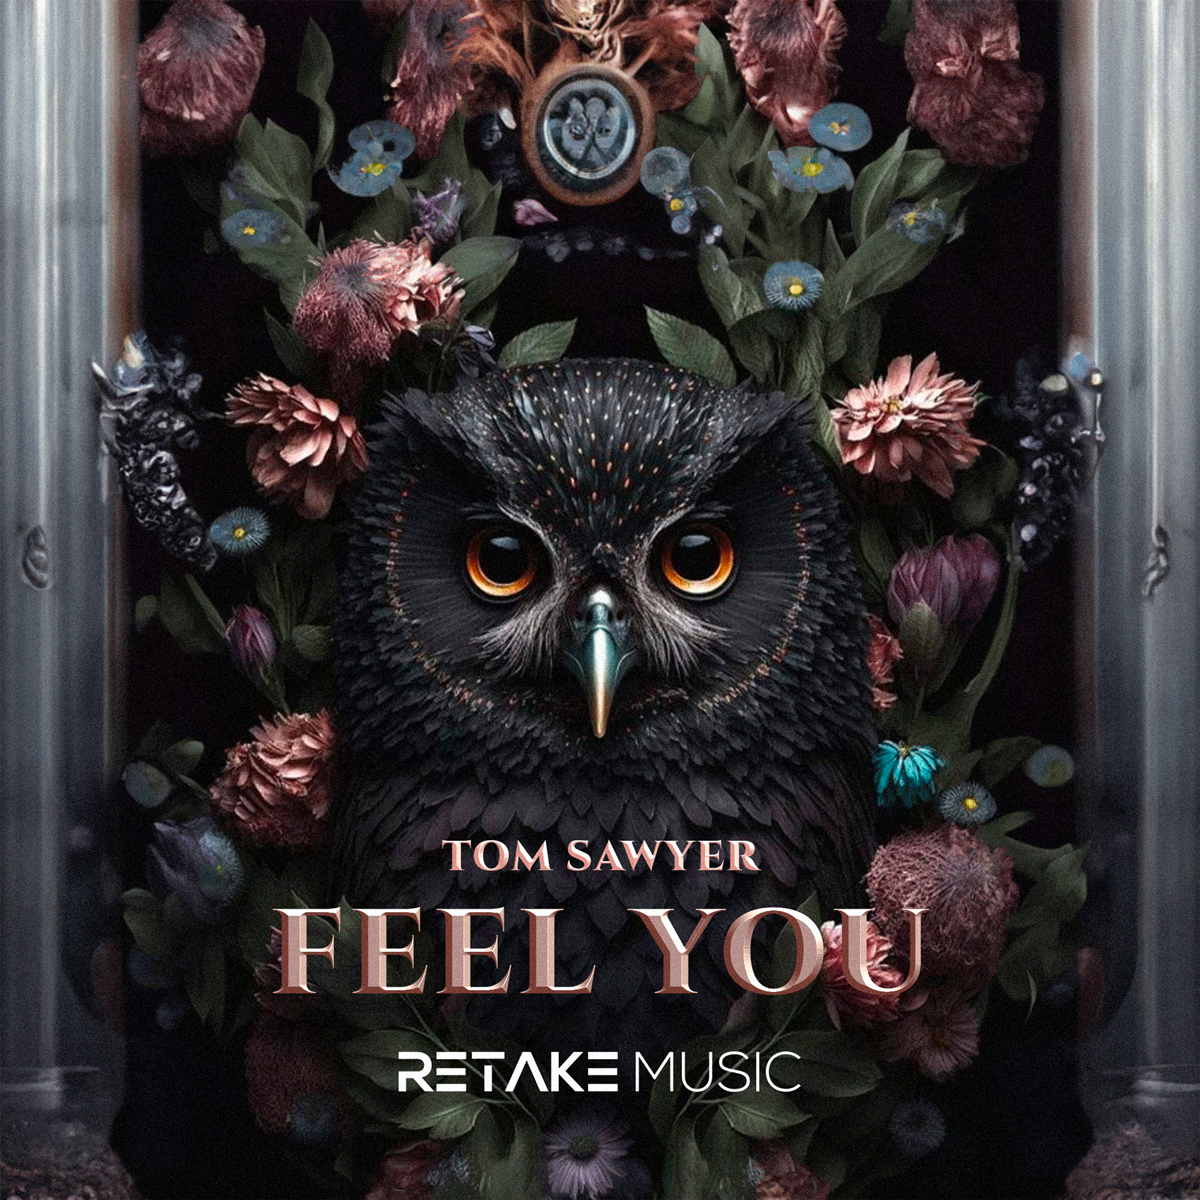 Tom Sawyer delivers a captivating house single titled "Feel You," released on RETAKE MUSIC